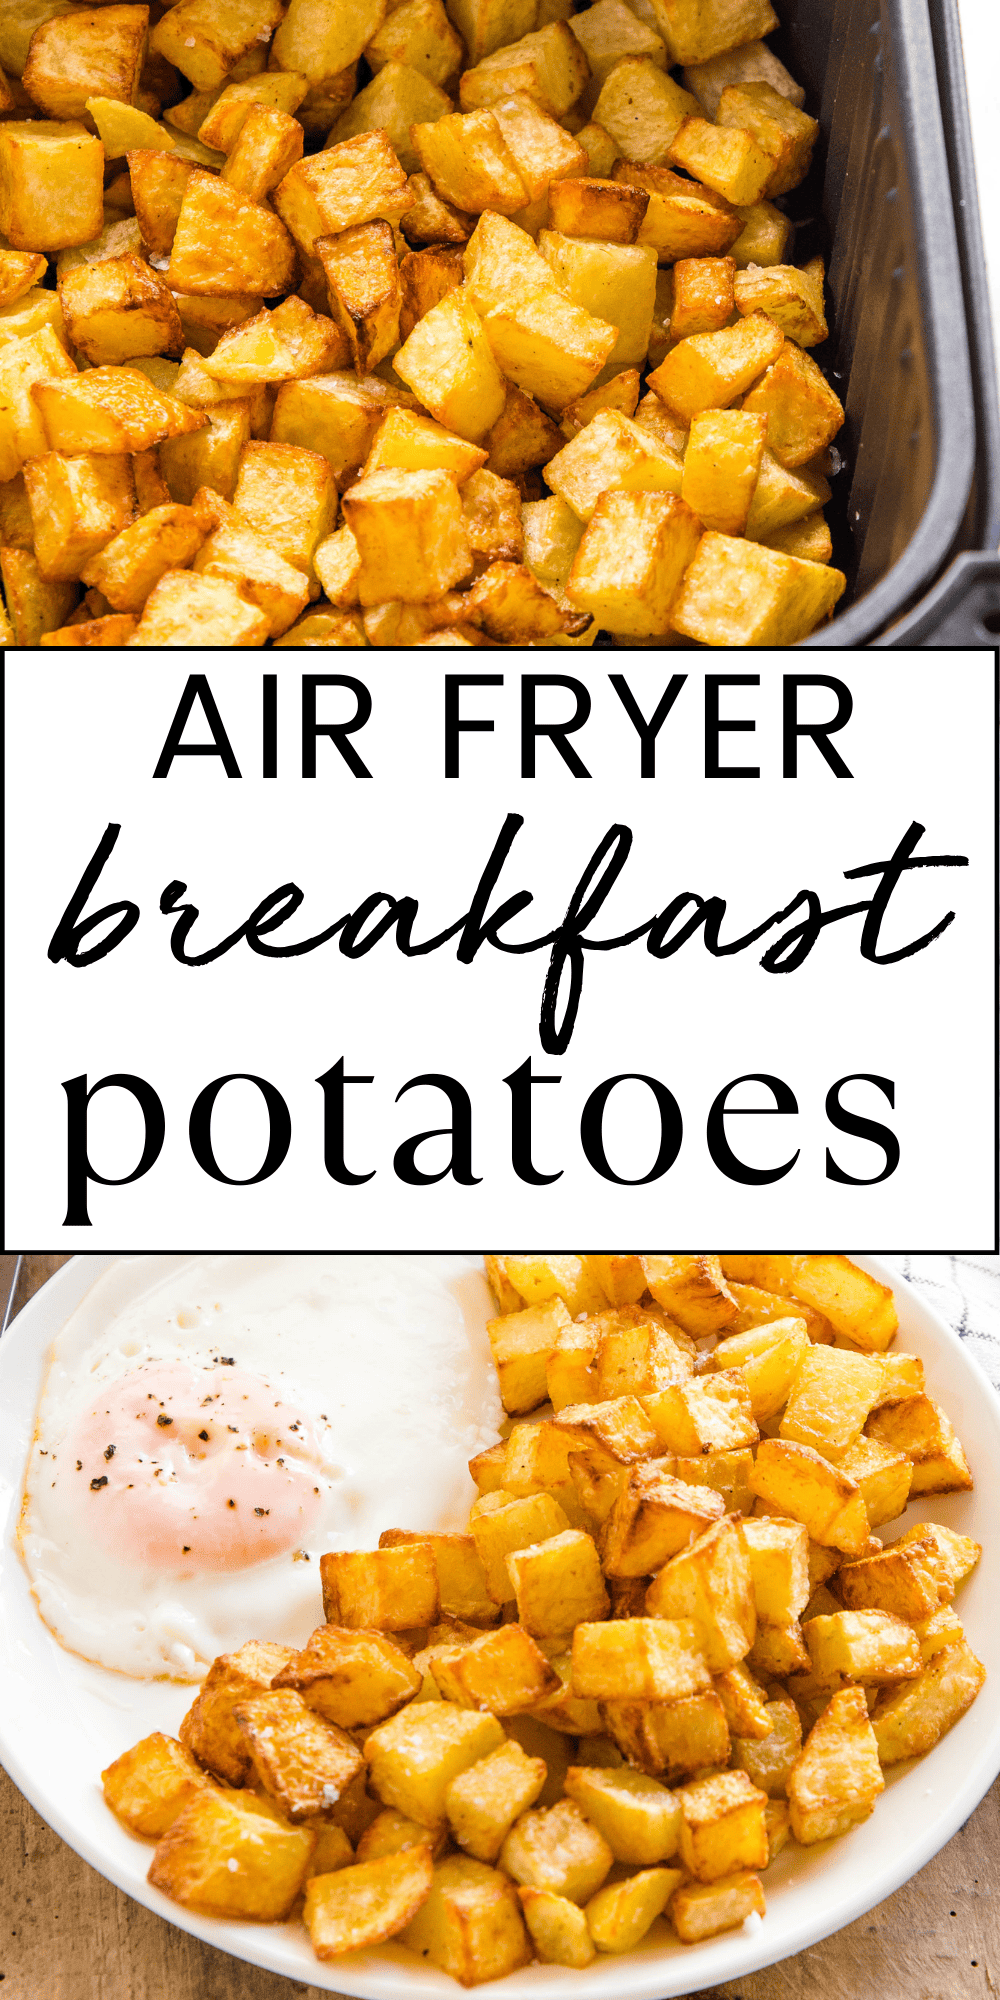 This Air Fryer Breakfast Potatoes recipe makes the perfect breakfast hash browns or home fries! Cubed potatoes cooked until golden & crispy with less fat - an easy side dish for breakfast or brunch. Recipe from thebusybaker.ca! #homefries #hashbrowns #breakfastpotatoes #airfryerbreakfast #airfryerbreakfastpotatoes #airfryersidedish #airfryerpotatoes #breakfast #brunch #homefriesrecipe #hashbrownsrecipe #airfryer via @busybakerblog